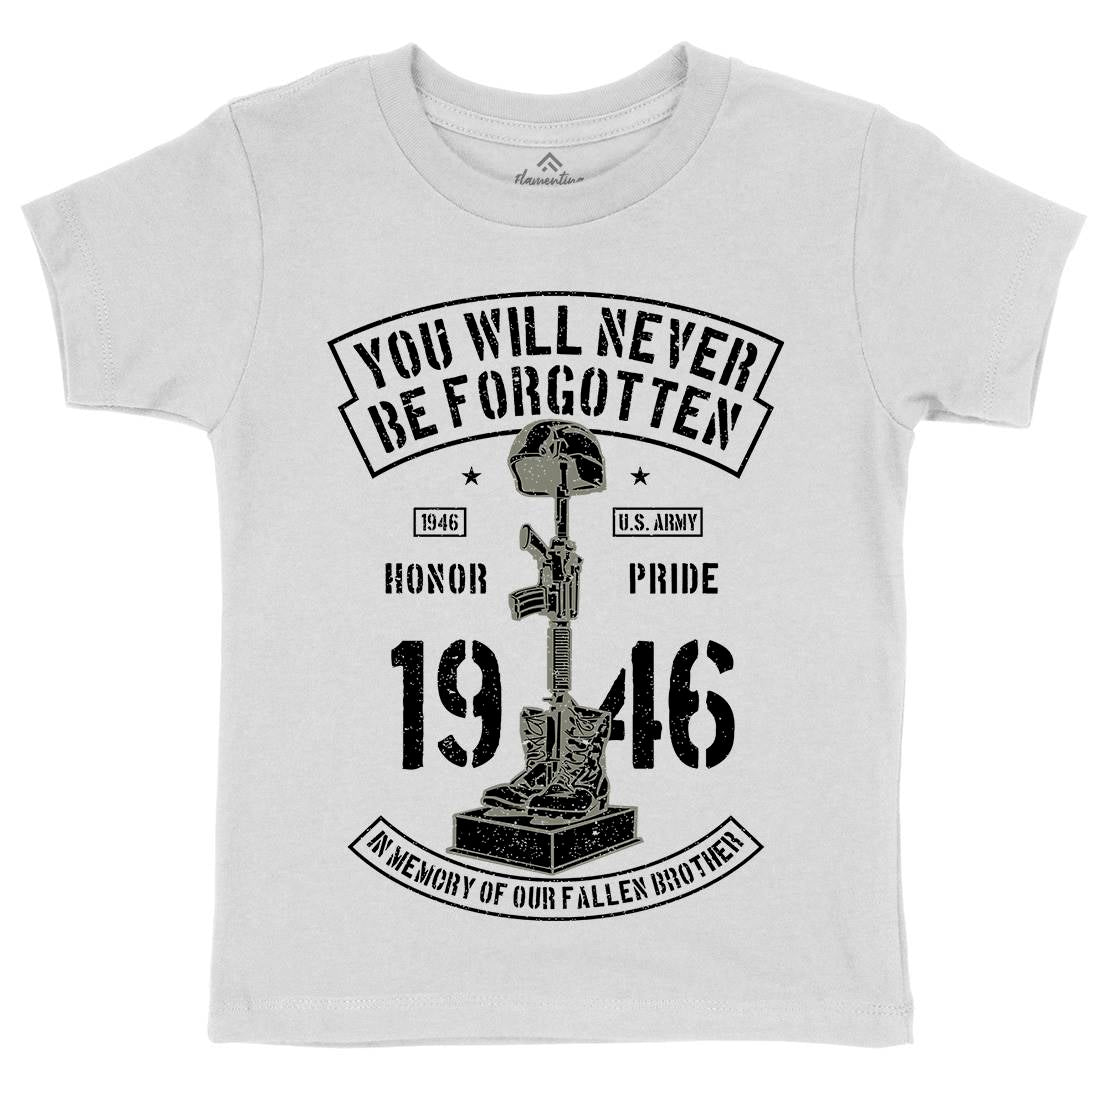 You Will Never Be Forgotten Kids Organic Crew Neck T-Shirt Army A800